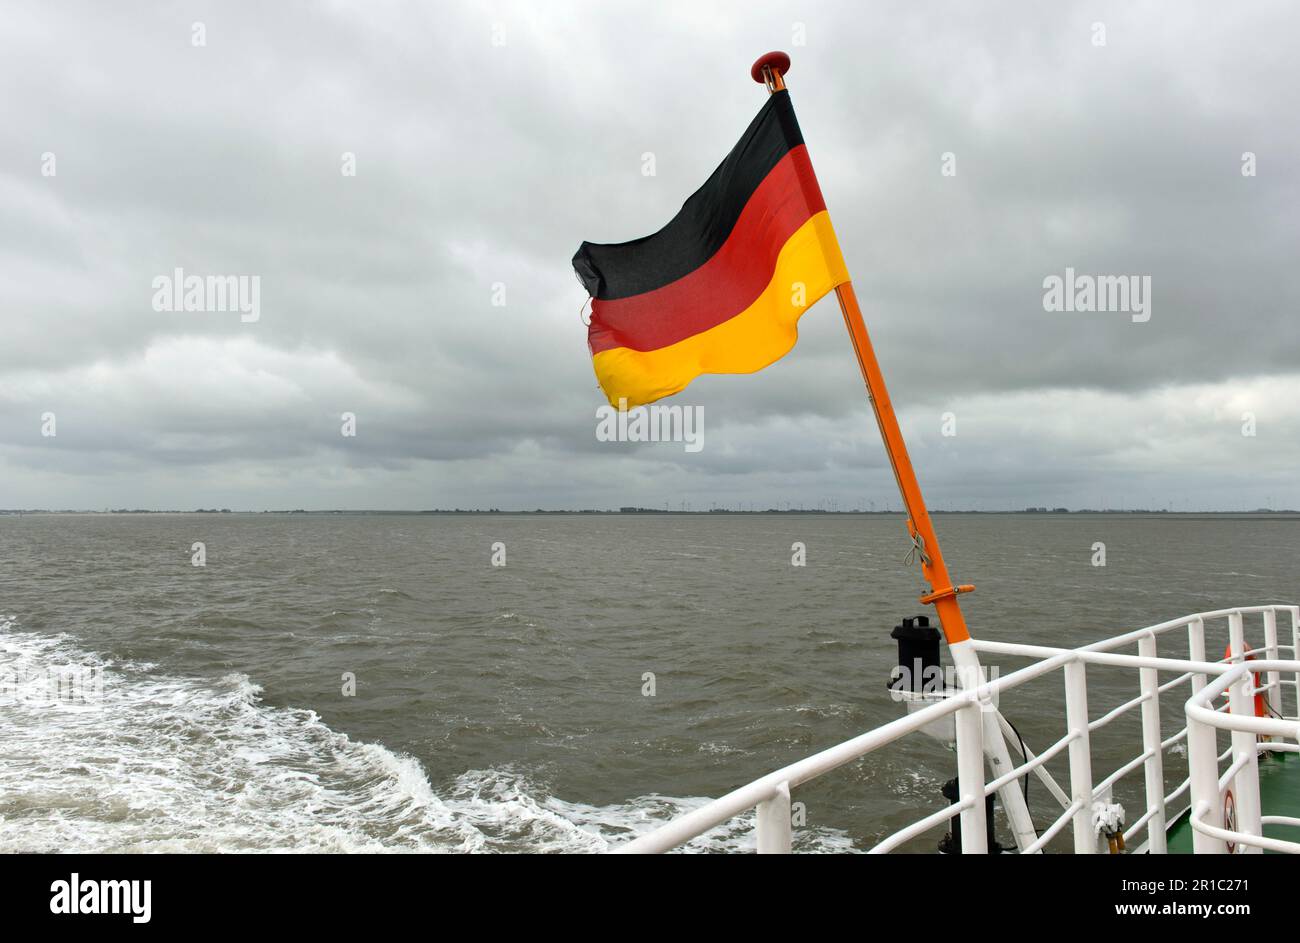 The German flag flies in the wind on the rail of a ferry on the North Sea between Bensersiel and Langeoog, East Frisian Islands, Lower Saxony, Germany Stock Photo